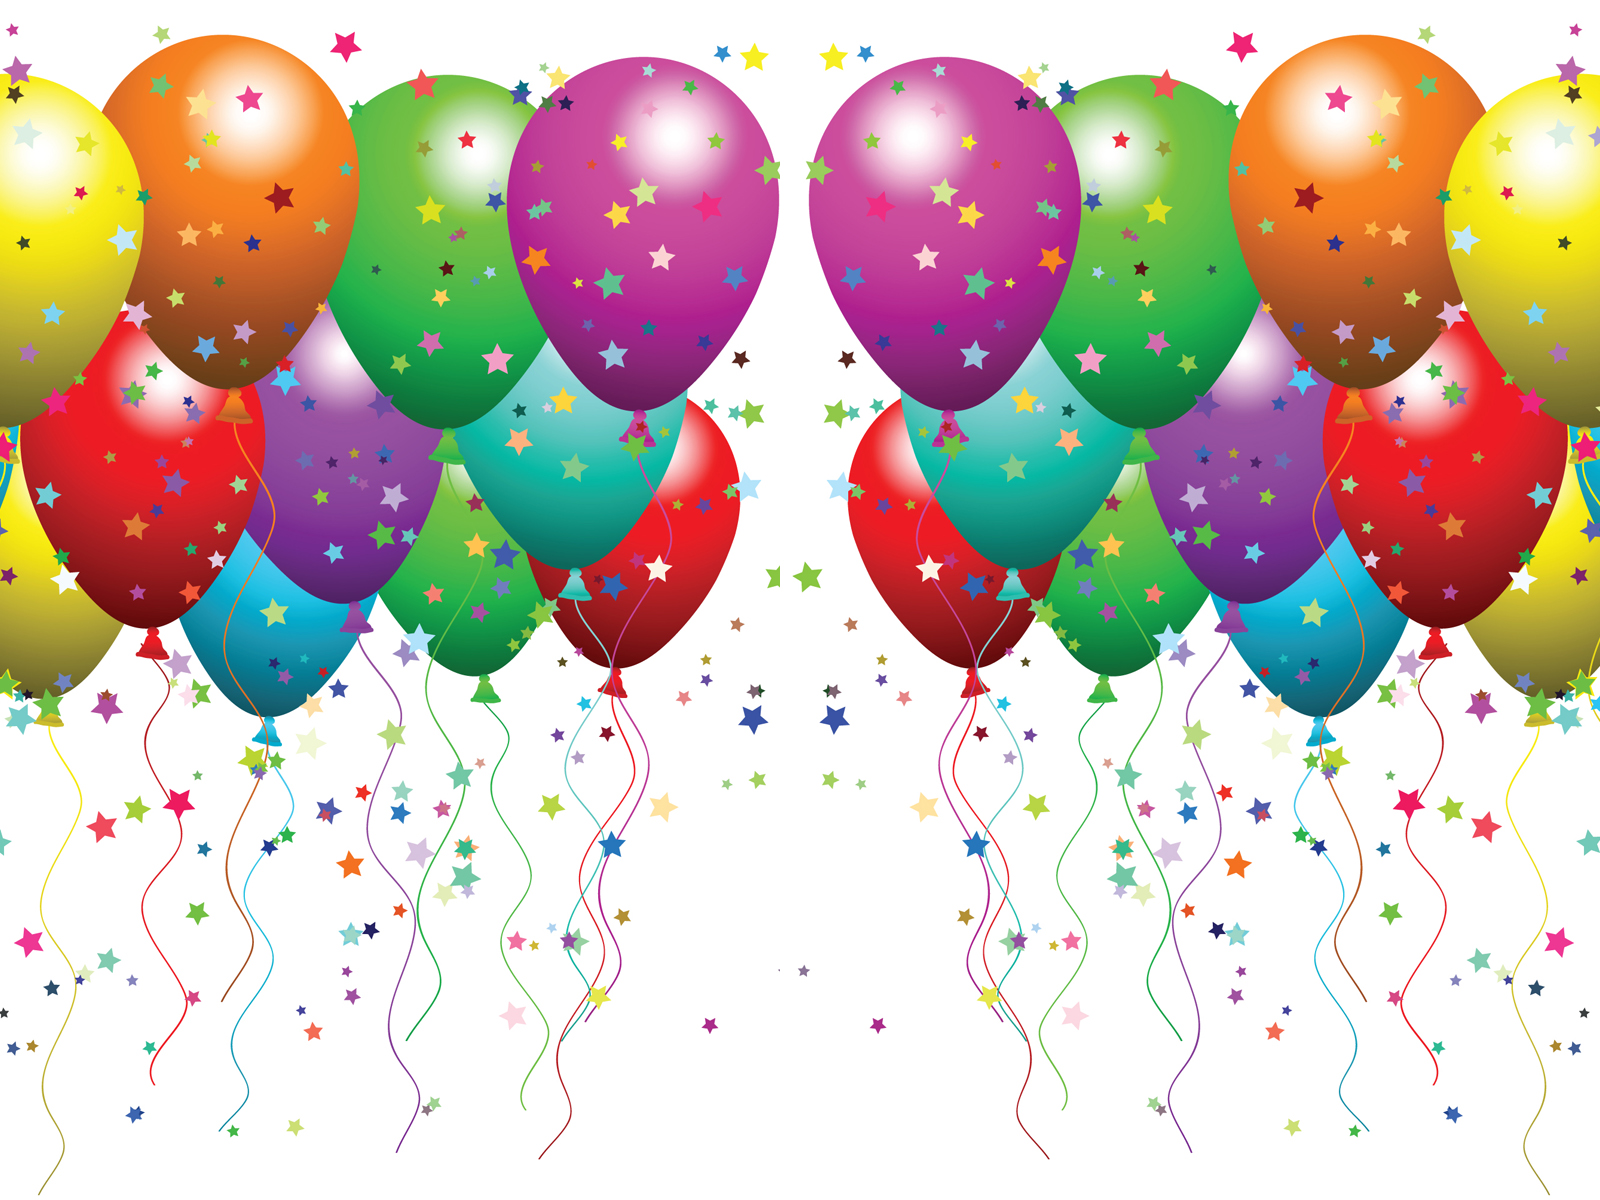 Balloons and confetti presentation PPT Backgrounds